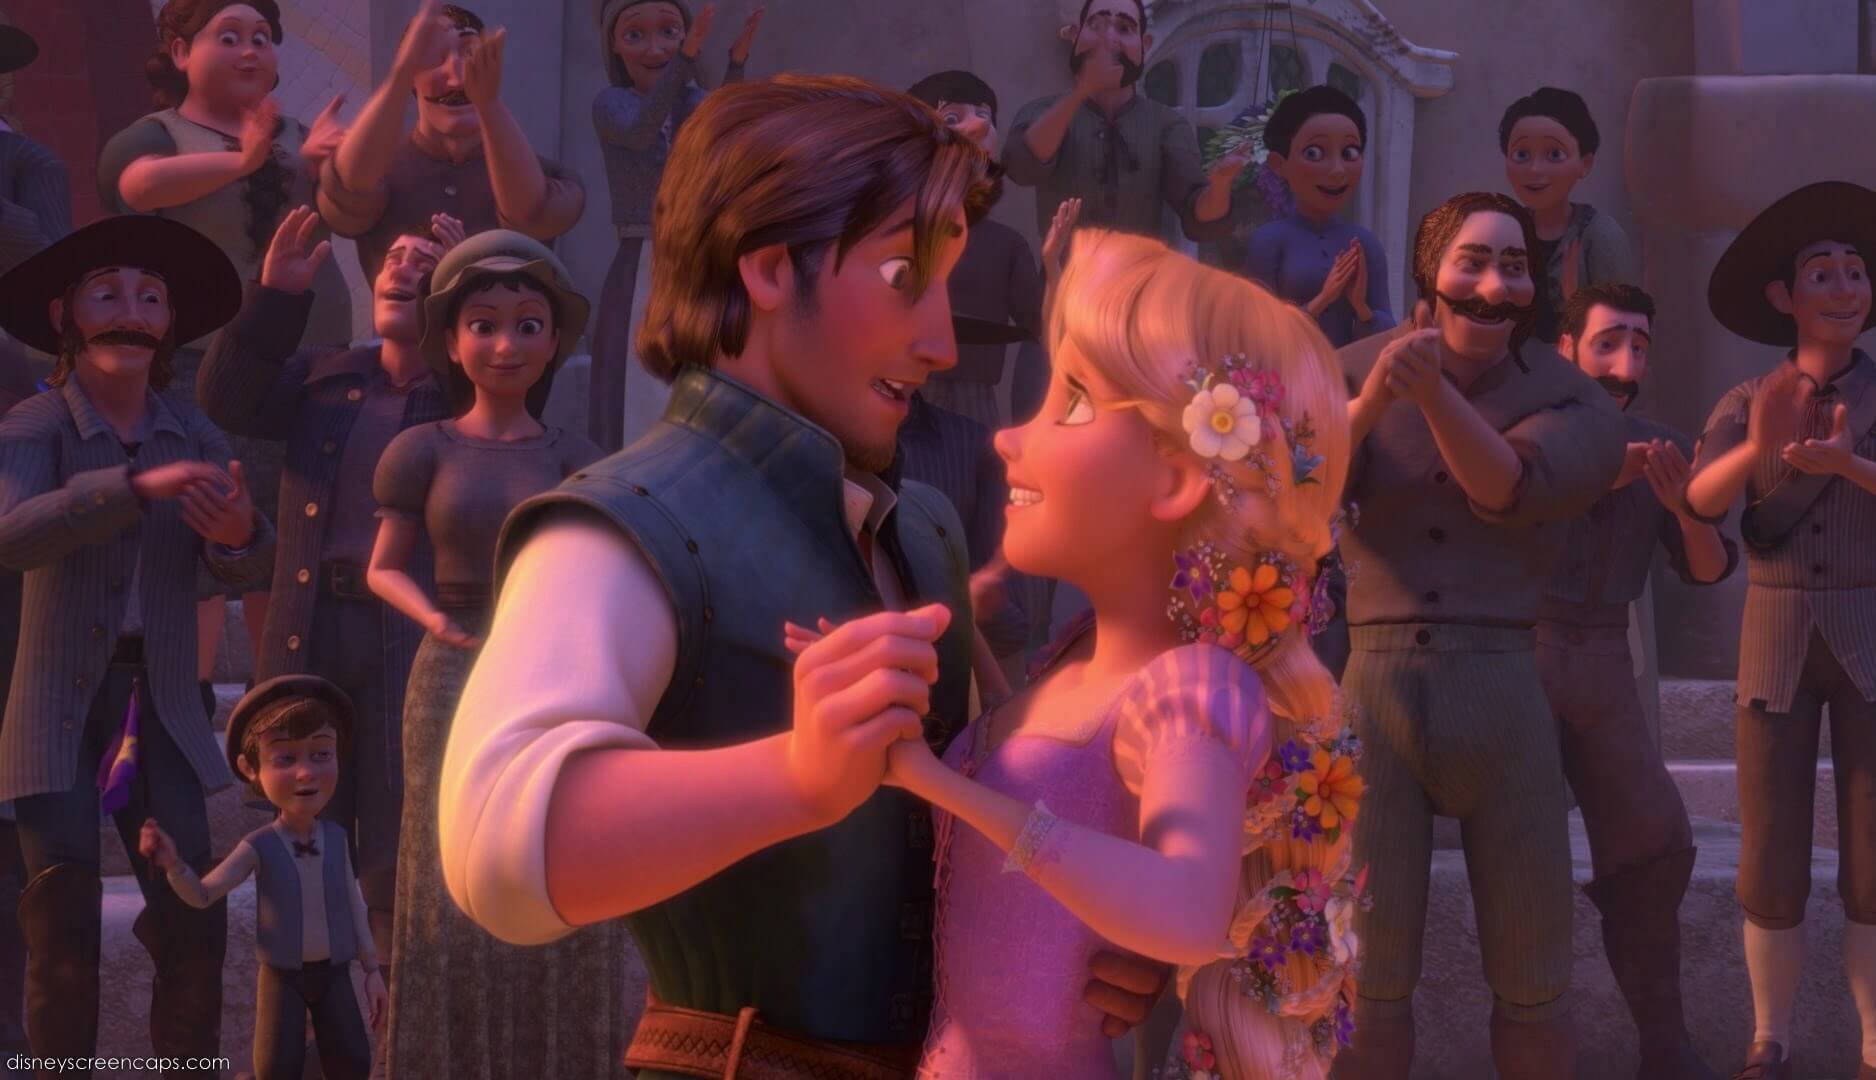 REVIEW: Tangled (2010) - Geeks + Gamers